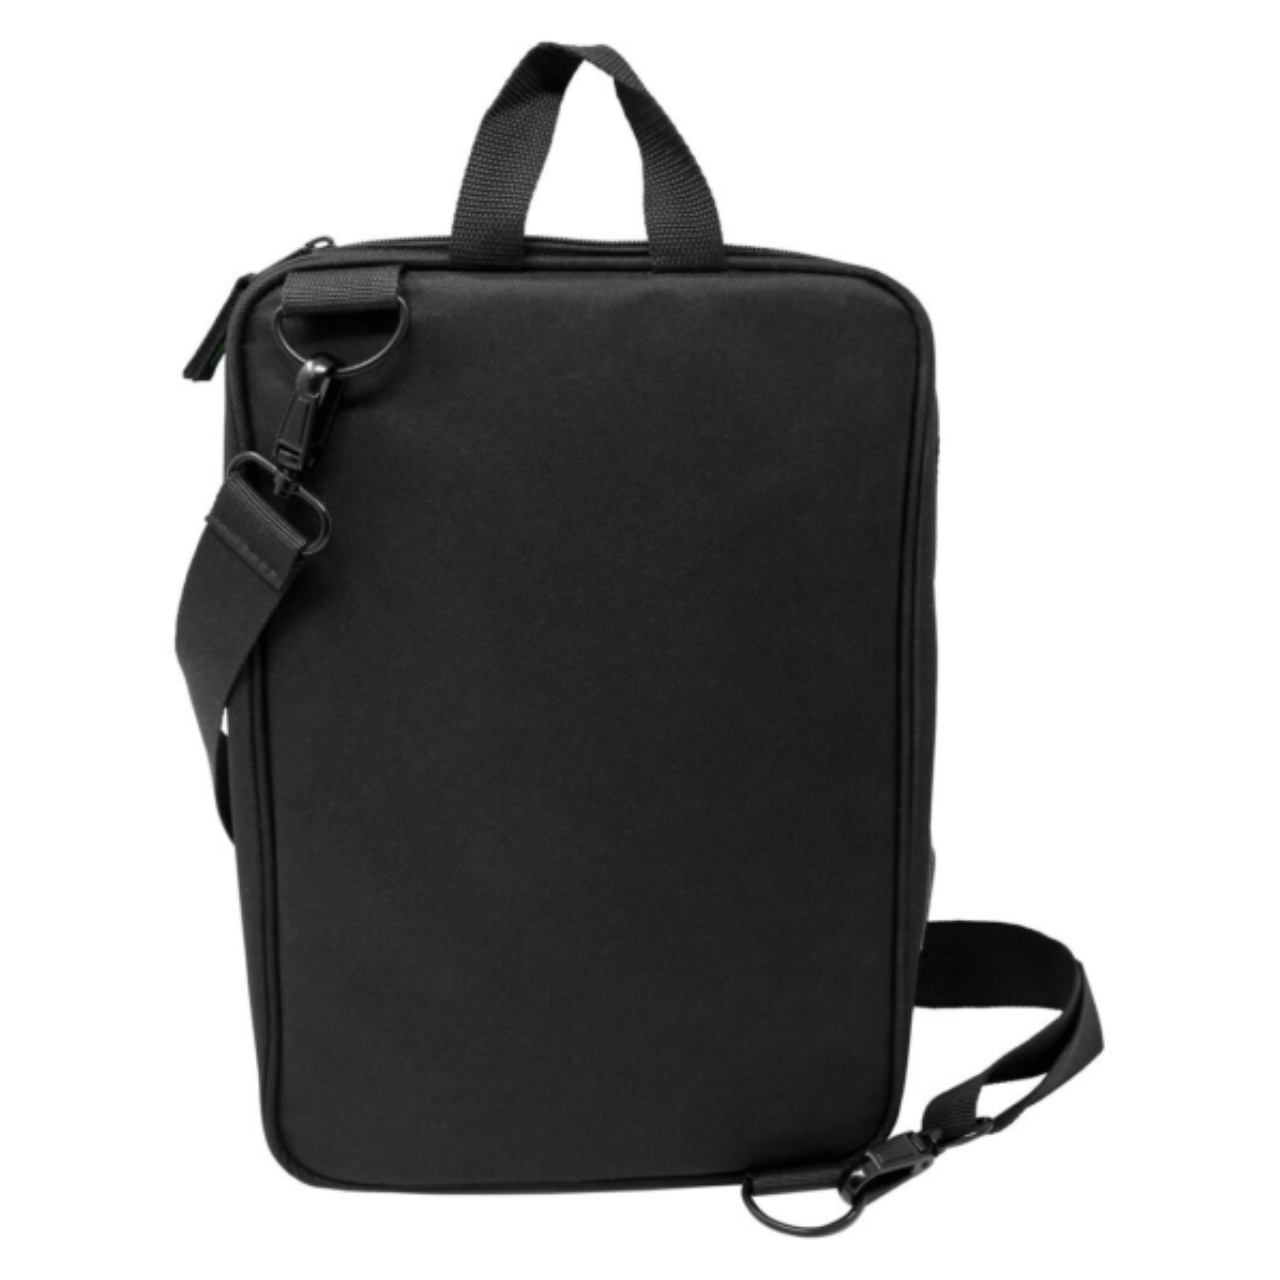 Mackie M-Caster Sling Bag at Bounce Online R2,255.00